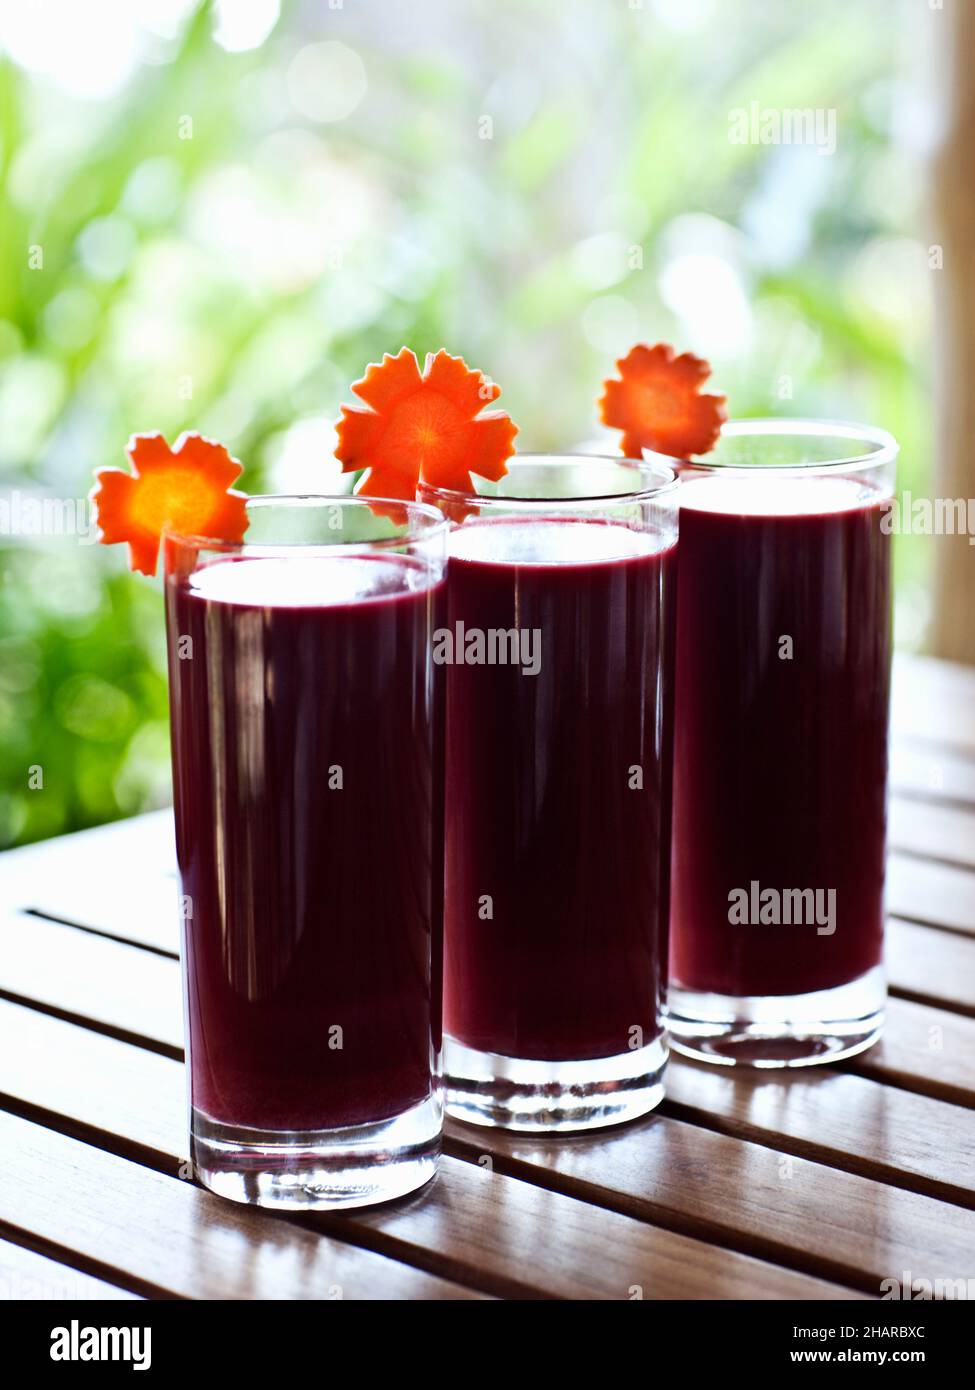 Trio of detox Juices at Kamalaya, Koh Samui, Thailand. A row of Red Zinger detox drinks are made of blended beet, cucumber, carrot and ginger juice. Stock Photo